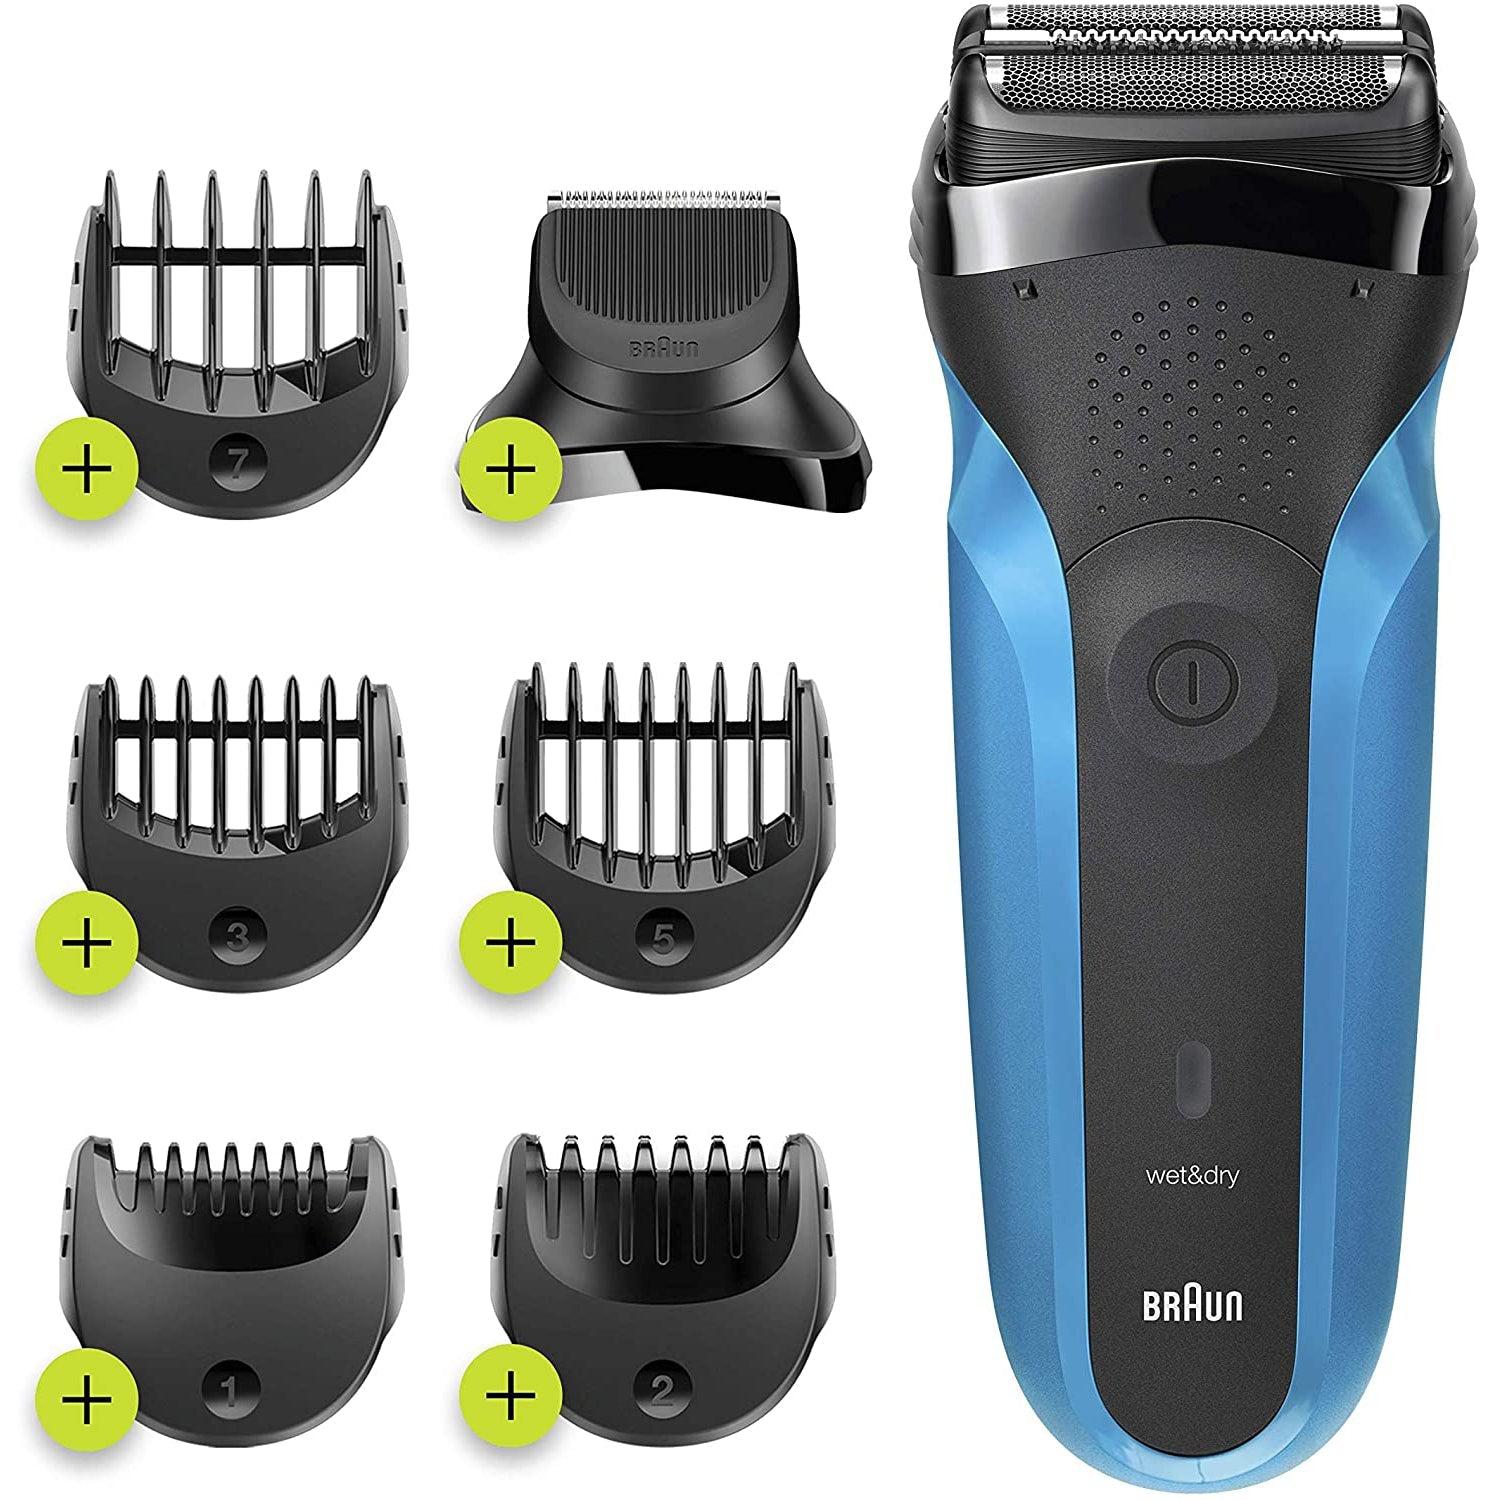 Braun Series 3 310BT - 3-in-1 Electric Shaver, Beard Trimmer with 5 Comb Attachments, Wet & Dry Black/Blue - Healthxpress.ie